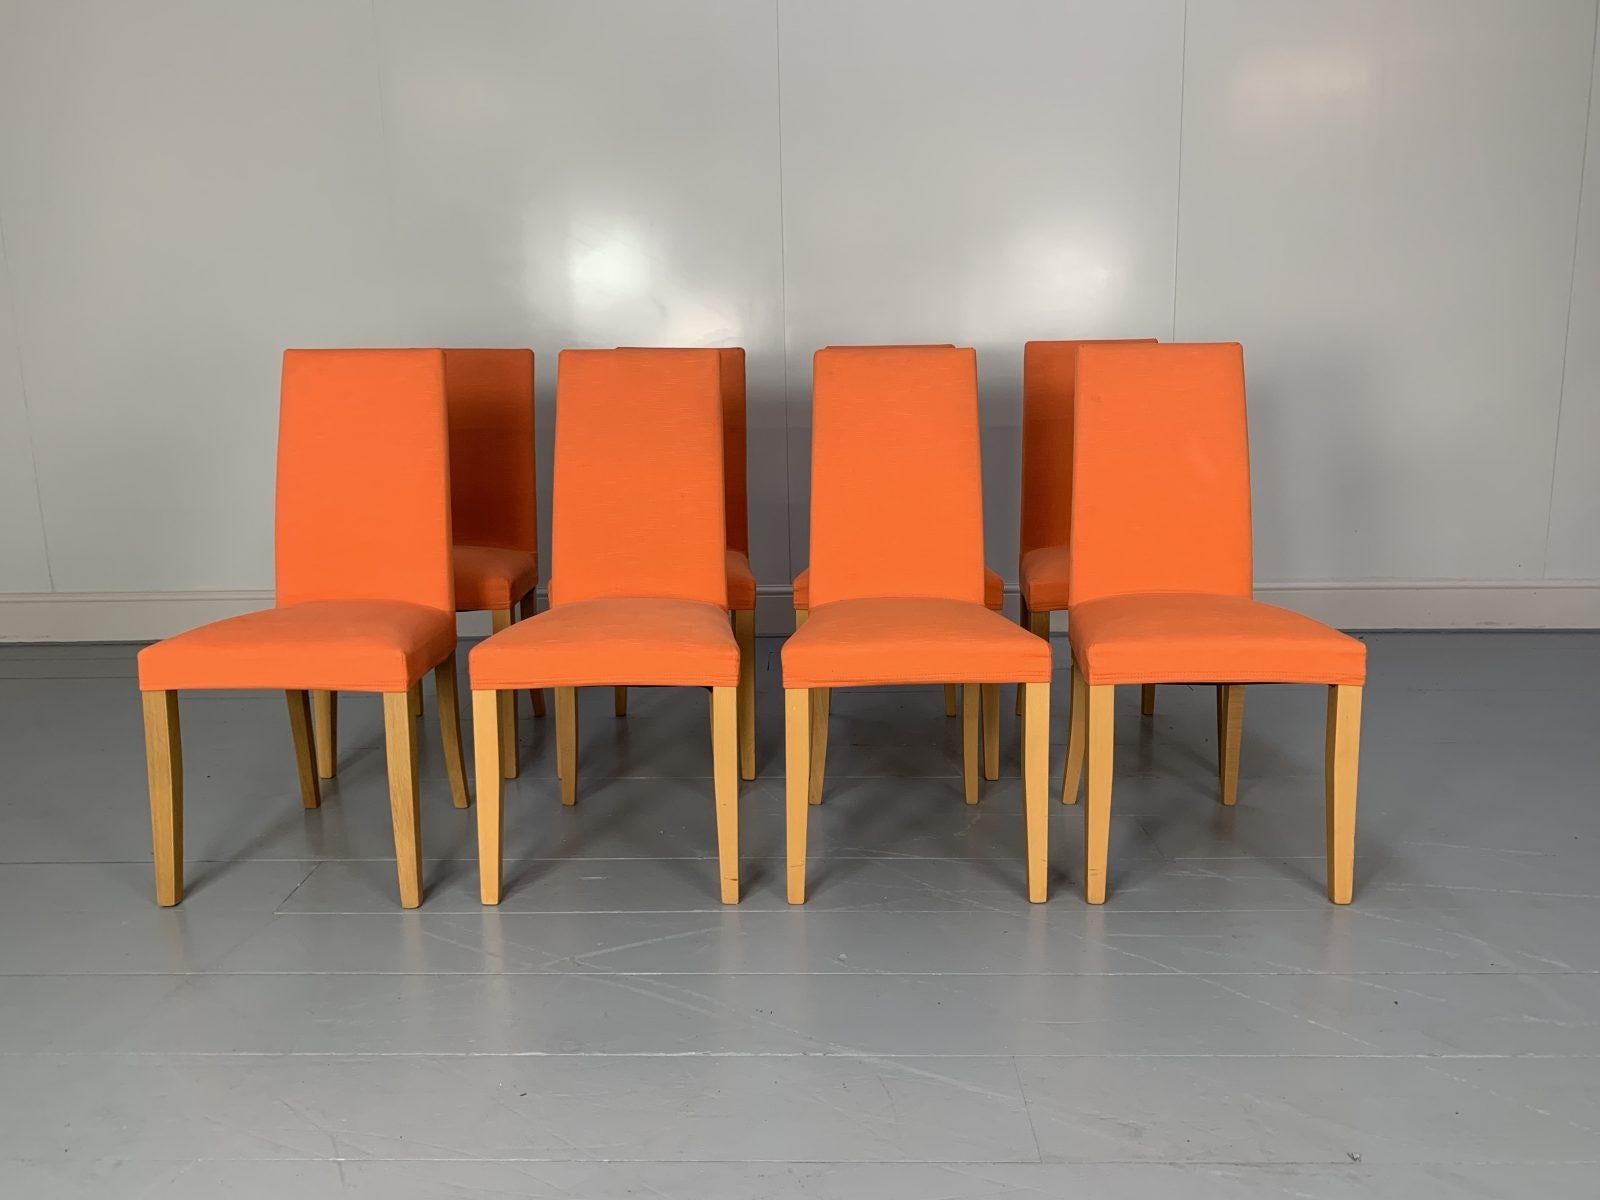 Contemporary Suite of 8 Ligne Roset “French Line” Dining Chairs in Orange Linen